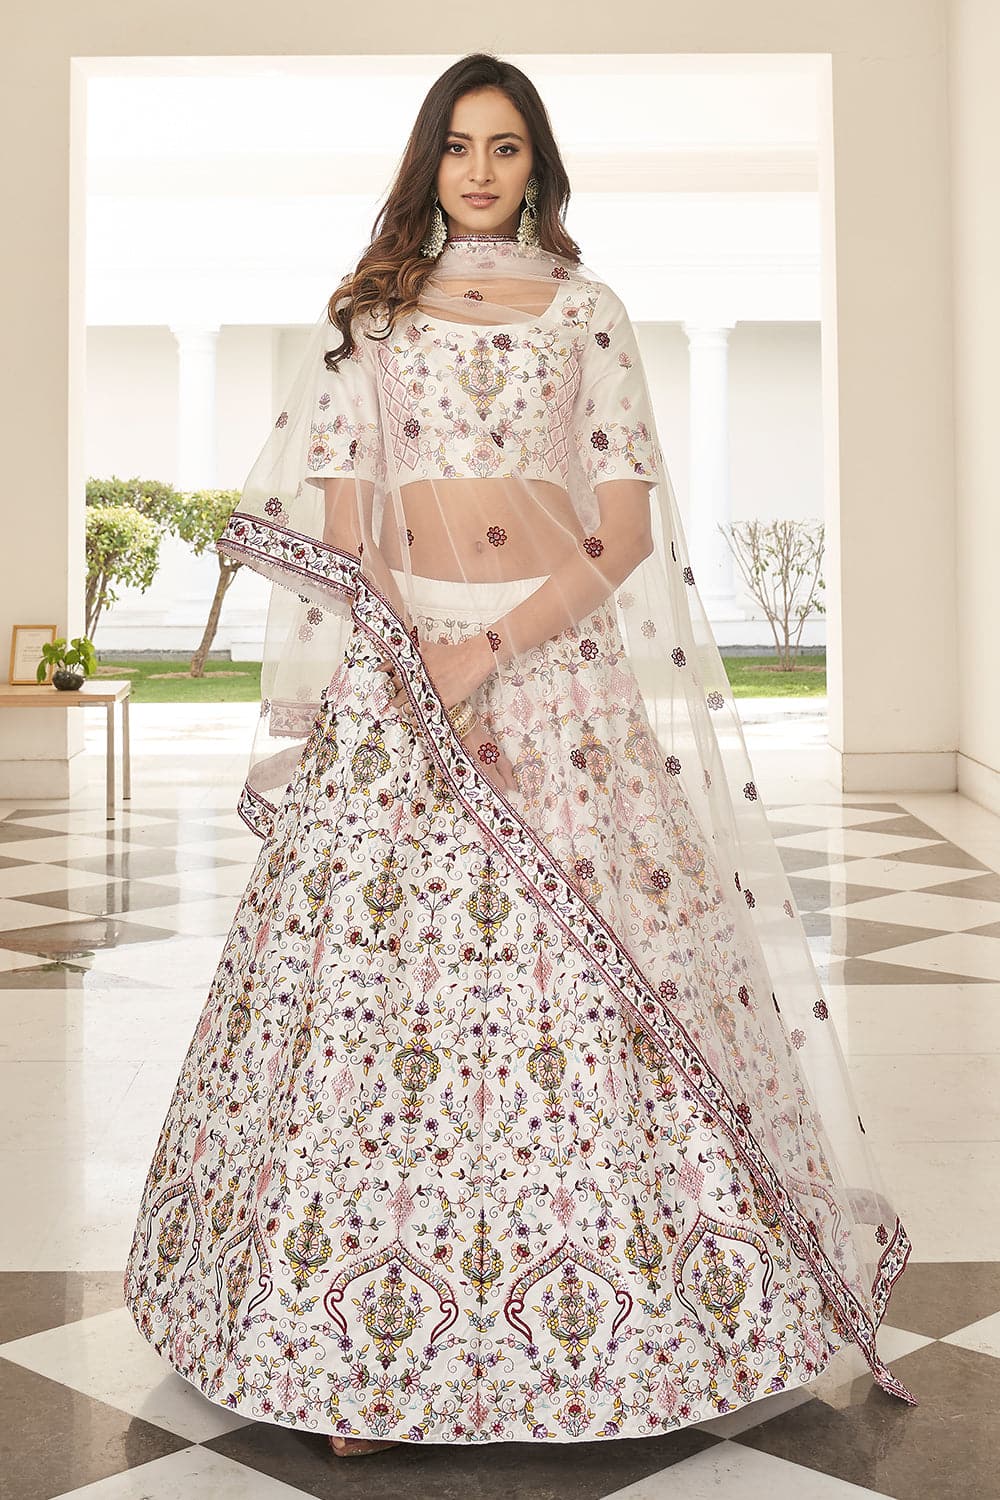 Tamannaah Bhatia makes jaws drop, steals the show in a golden pearl-embellished  lehenga | Entertainment News - News9live